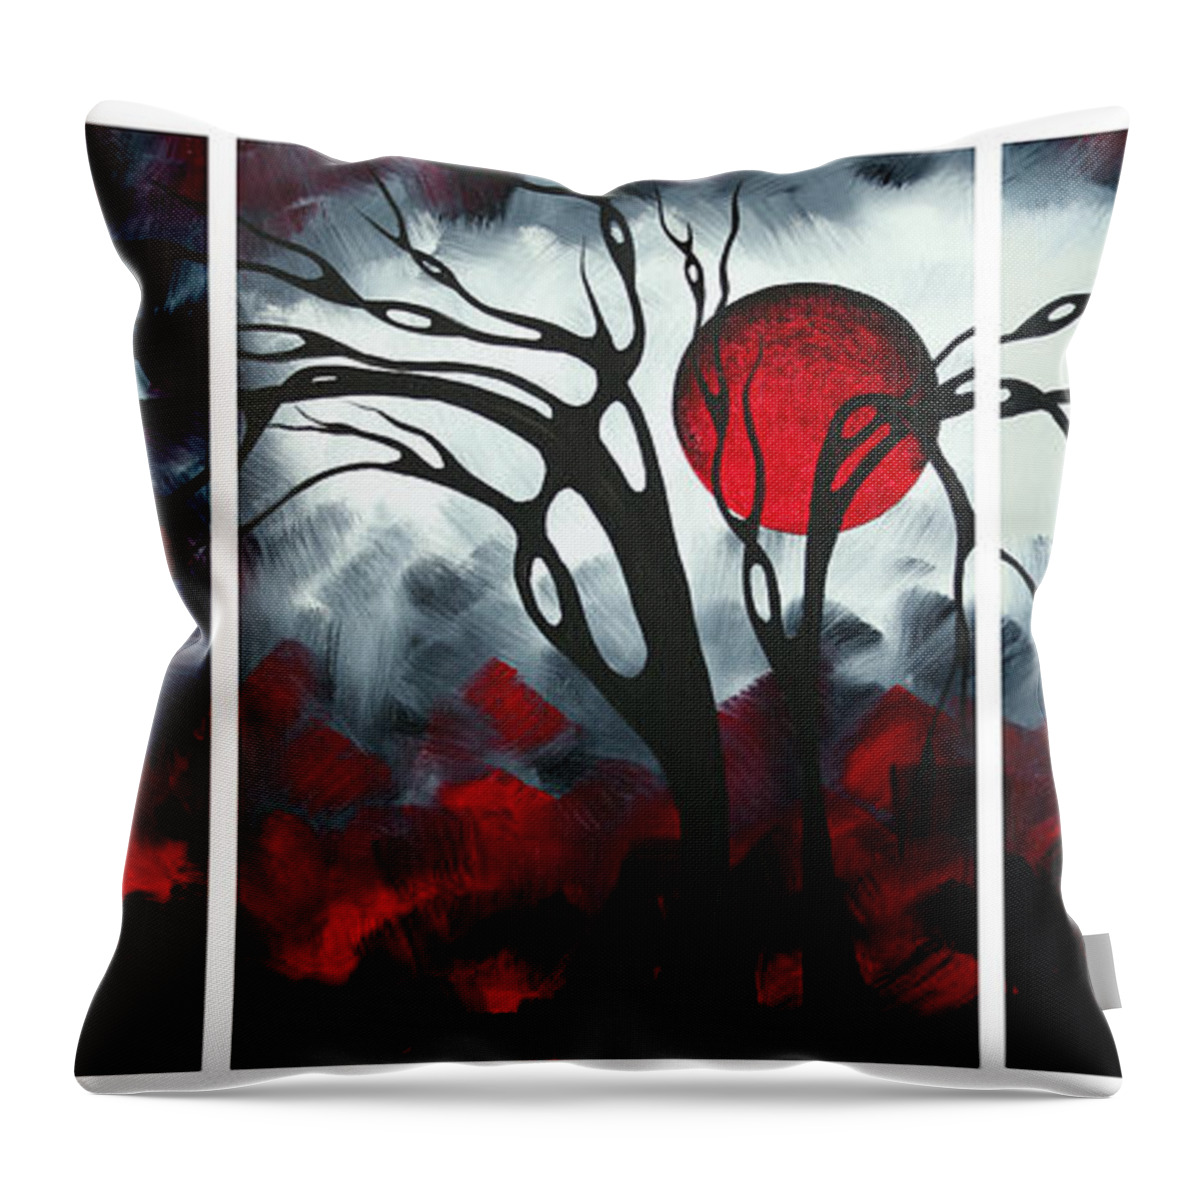 Abstract Throw Pillow featuring the painting Abstract Gothic Art Original Landscape Painting IMAGINE by MADART by Megan Aroon